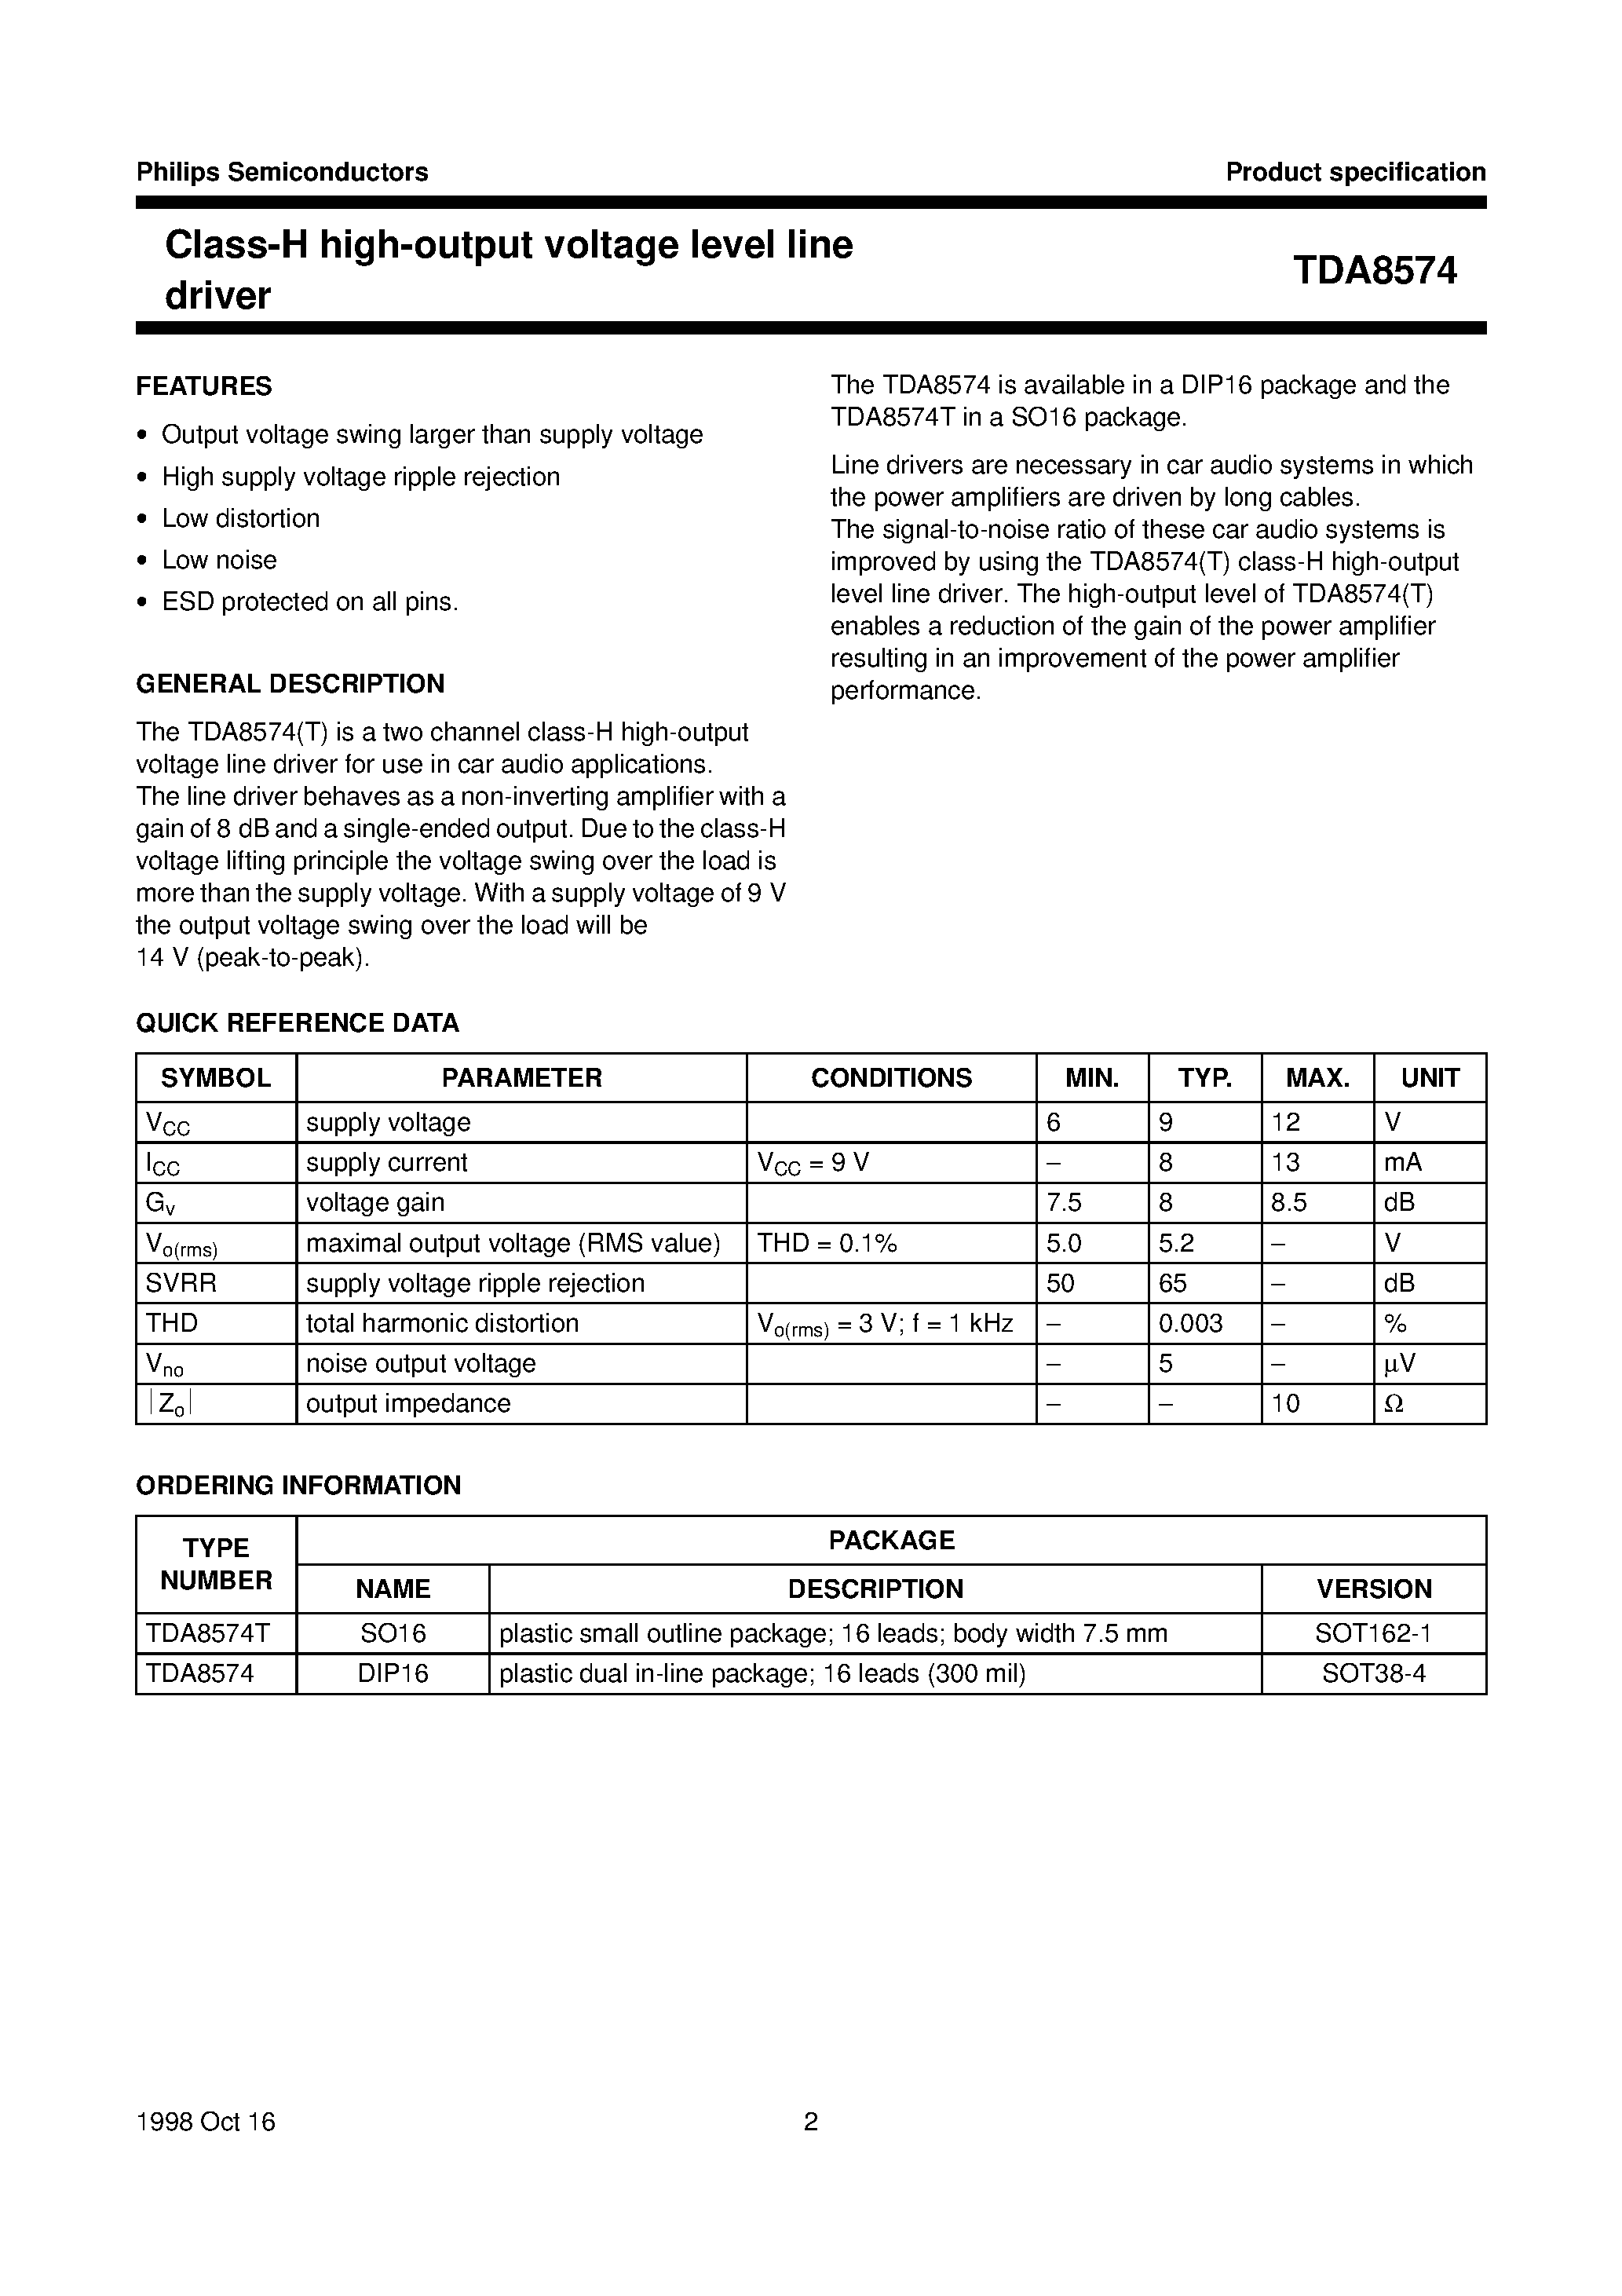 Datasheet TDA8574T - Class-H high-output voltage level line driver page 2